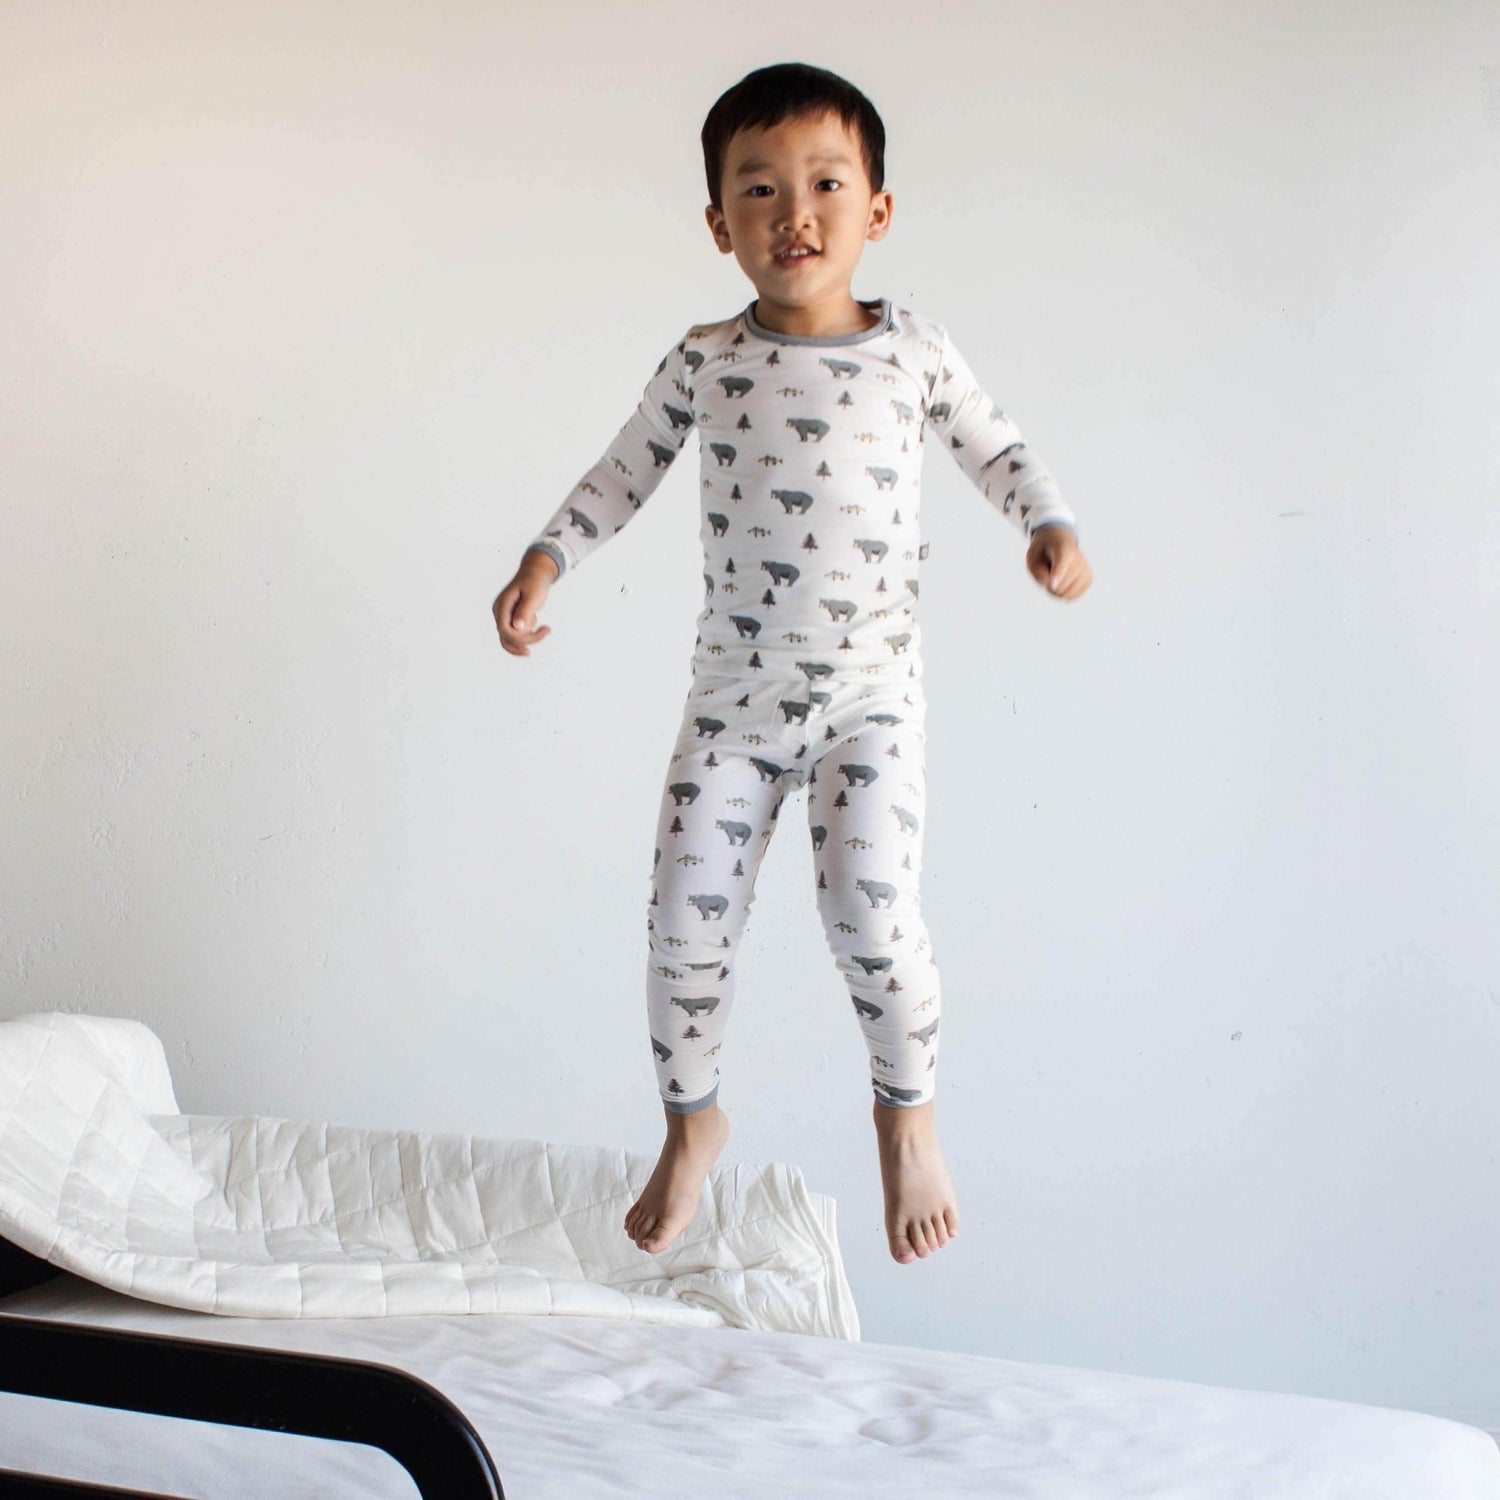 Toddler Chores, Pajamas, Jumping on the Bed